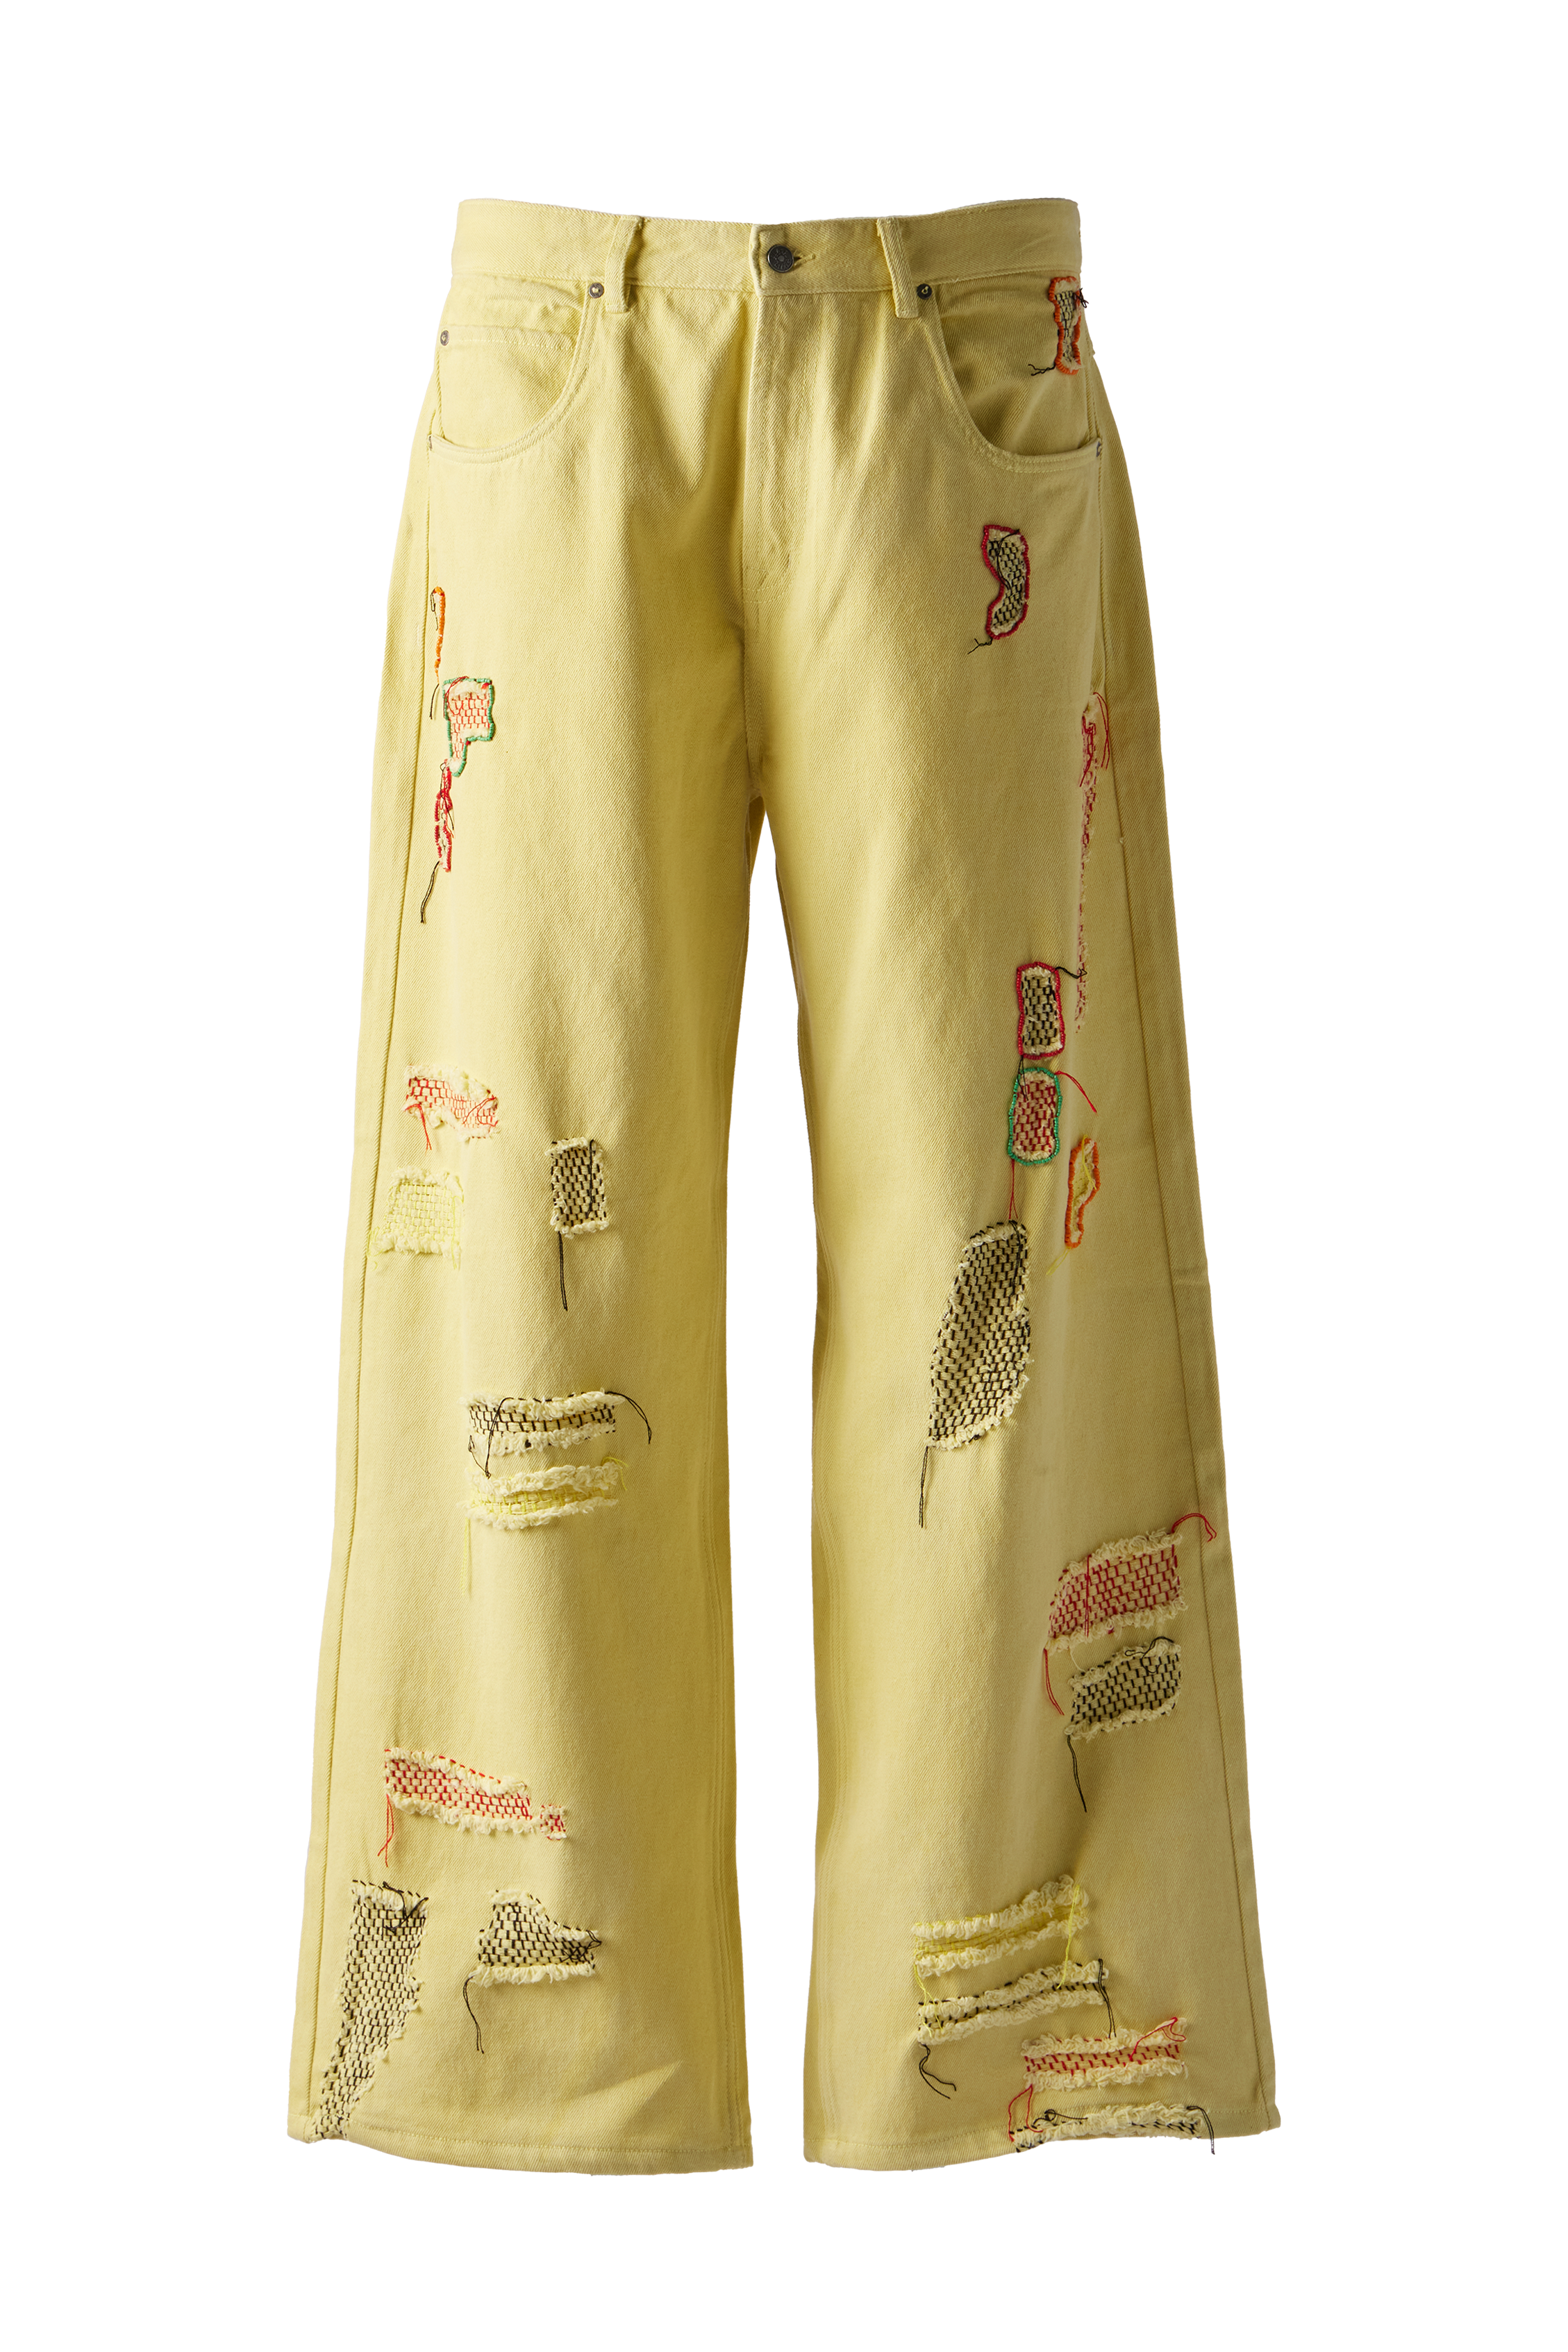 GLASS CYPRESS - Yellow Reconstructed Shredded Denim product image